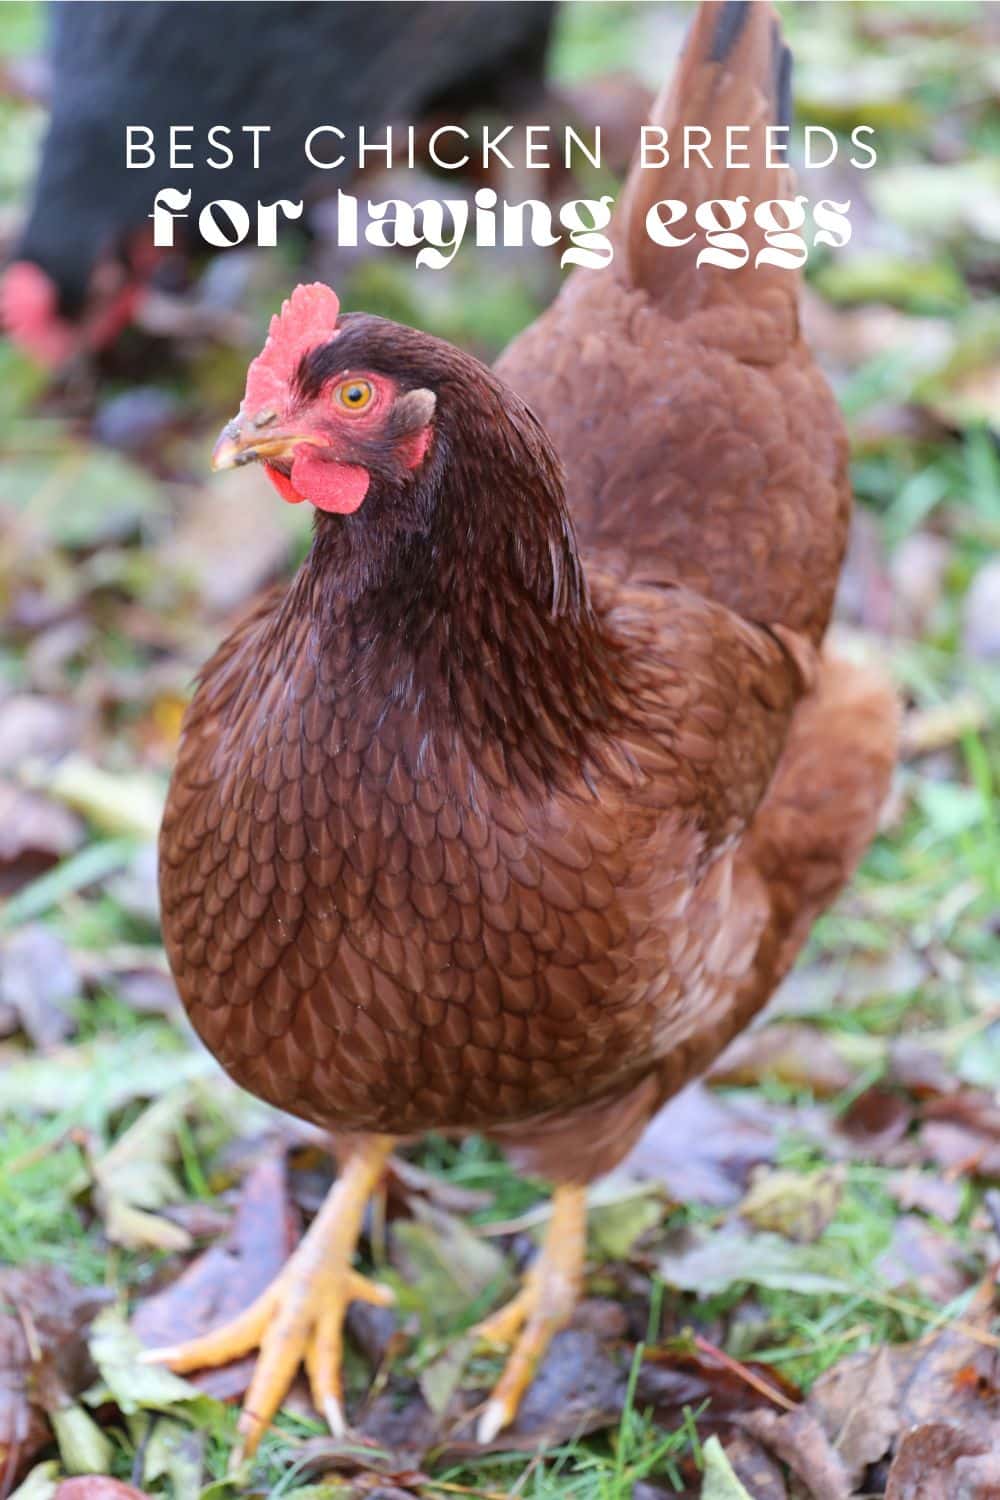 All female chickens (hens) are capable of laying eggs, but not all chickens will lay eggs consistently. Chickens are domesticated birds that are kept by people all over the world for their eggs, meat, and feathers. Chickens are a type of poultry and are related to other birds such as ducks, geese, and turkeys.